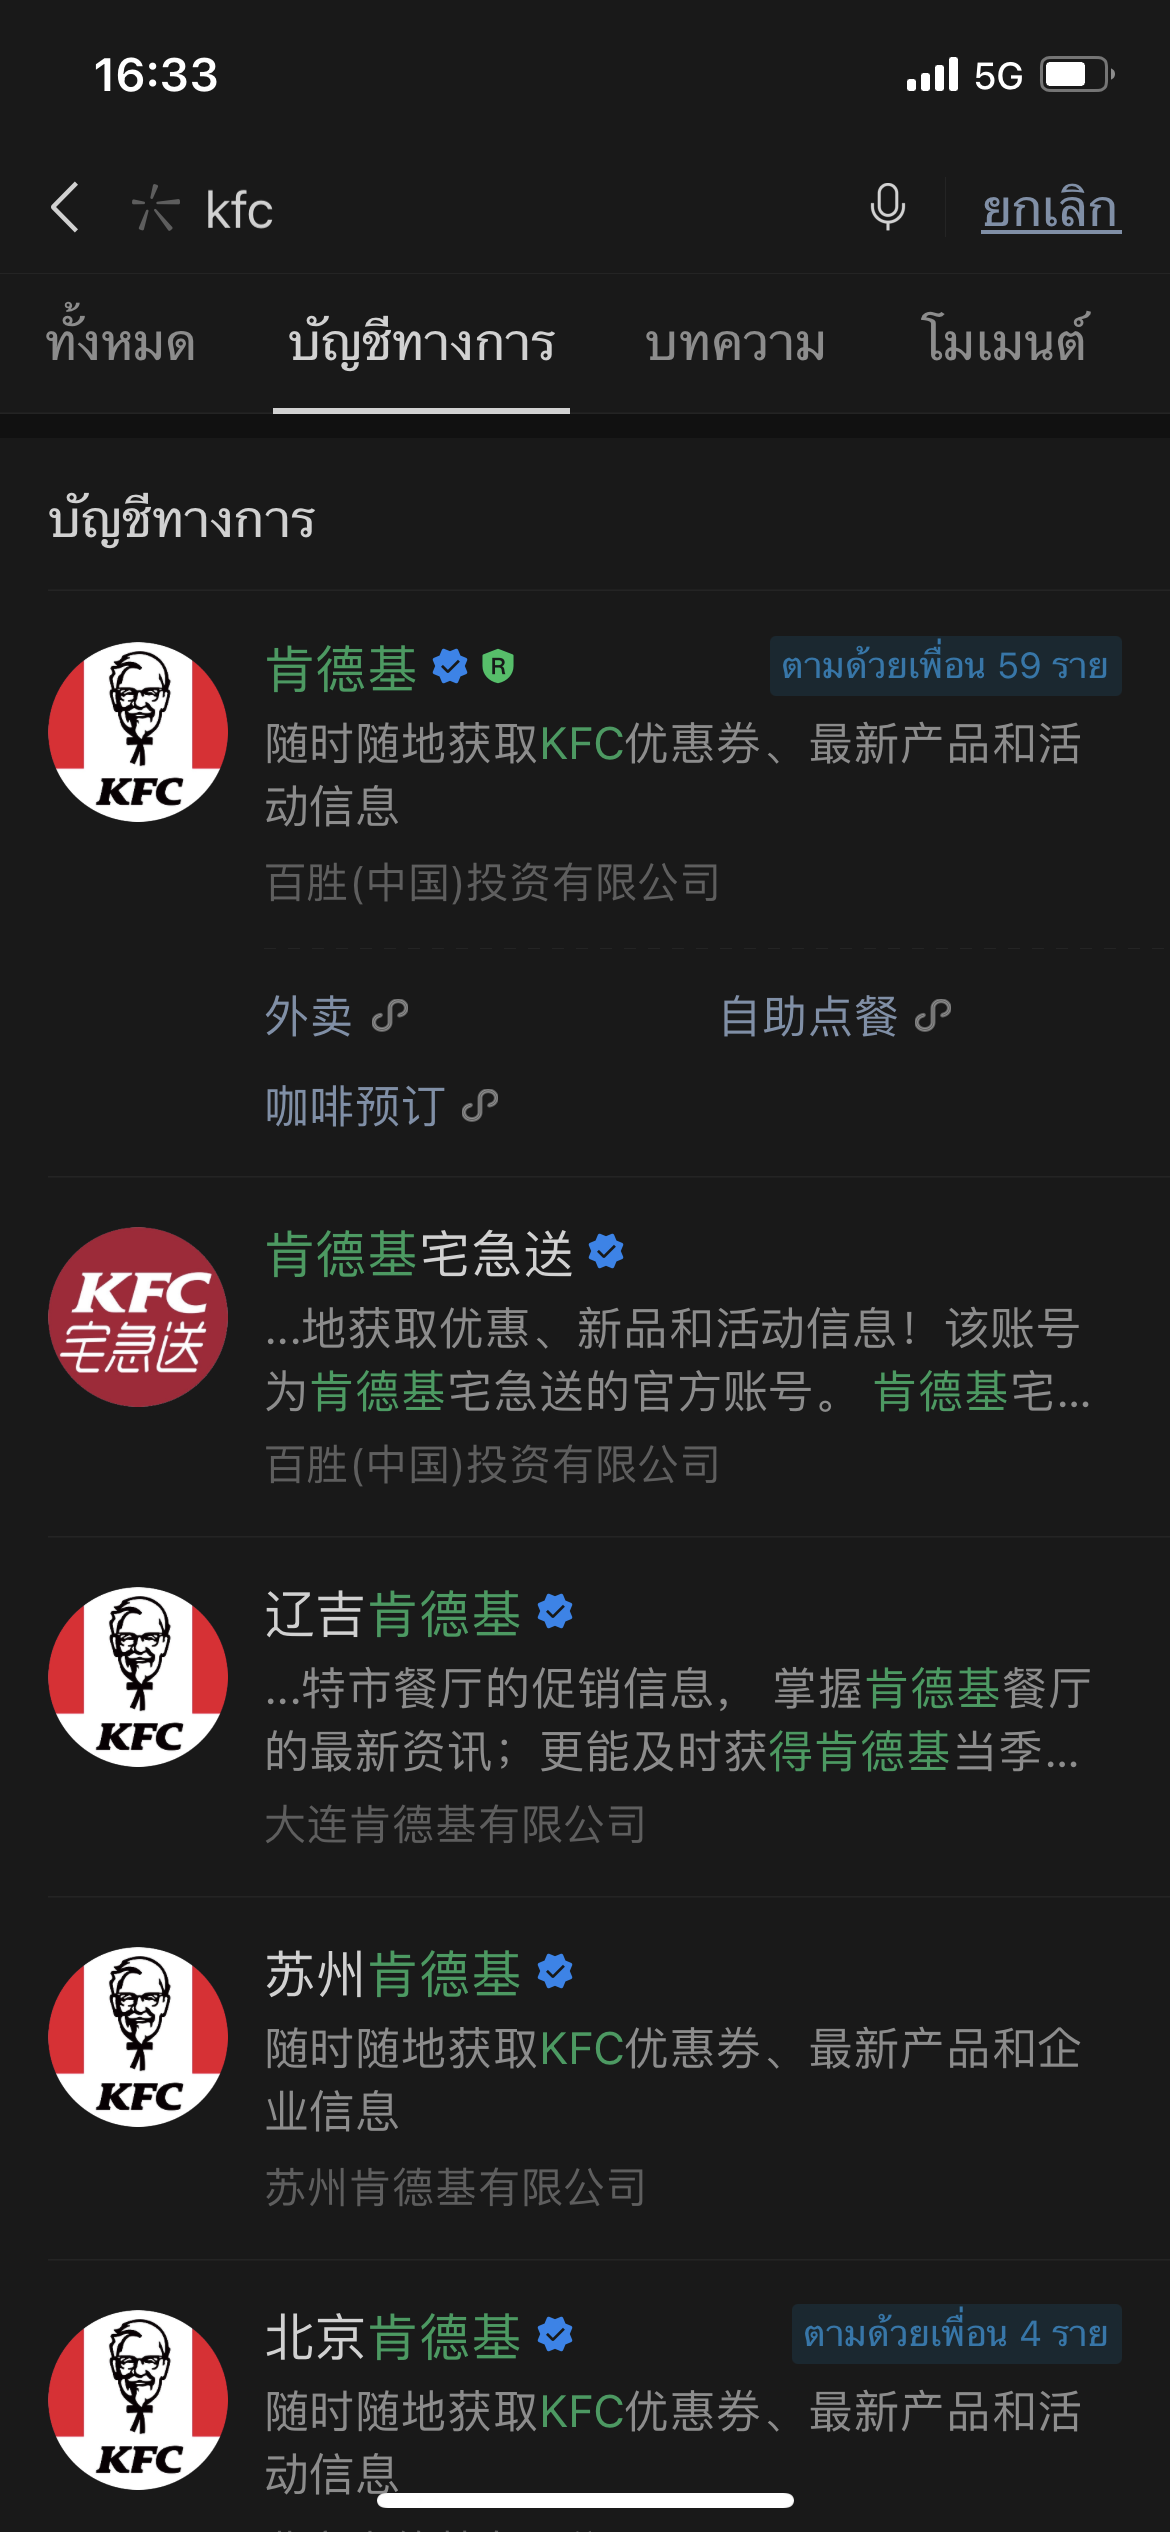 KFC Official Account